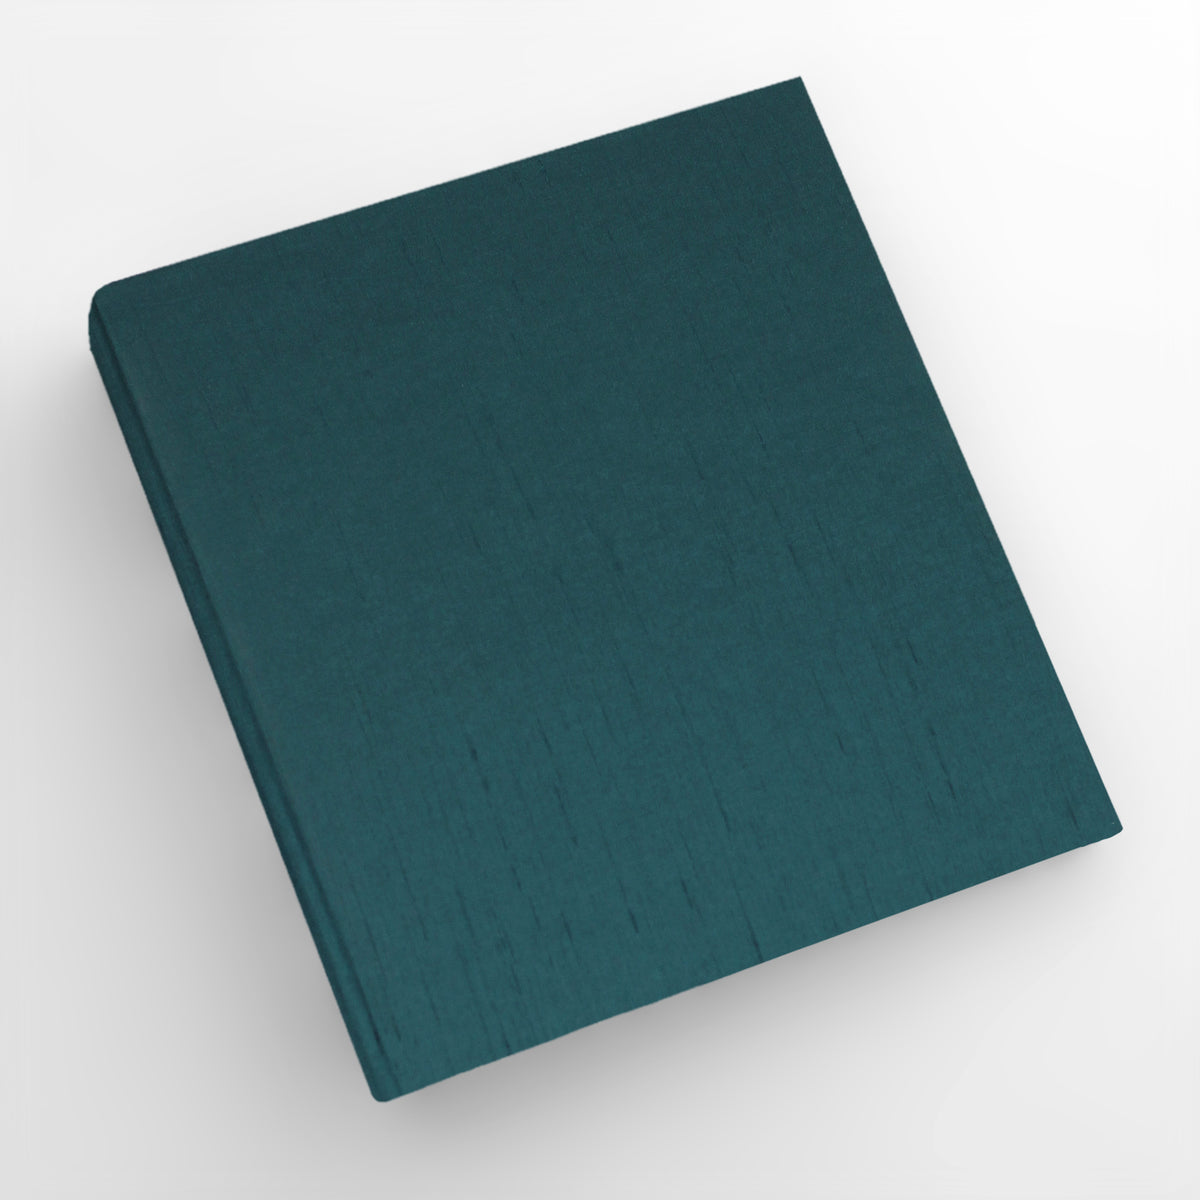 Storage Binder for Photos or Documents with Teal Blue Silk Cover